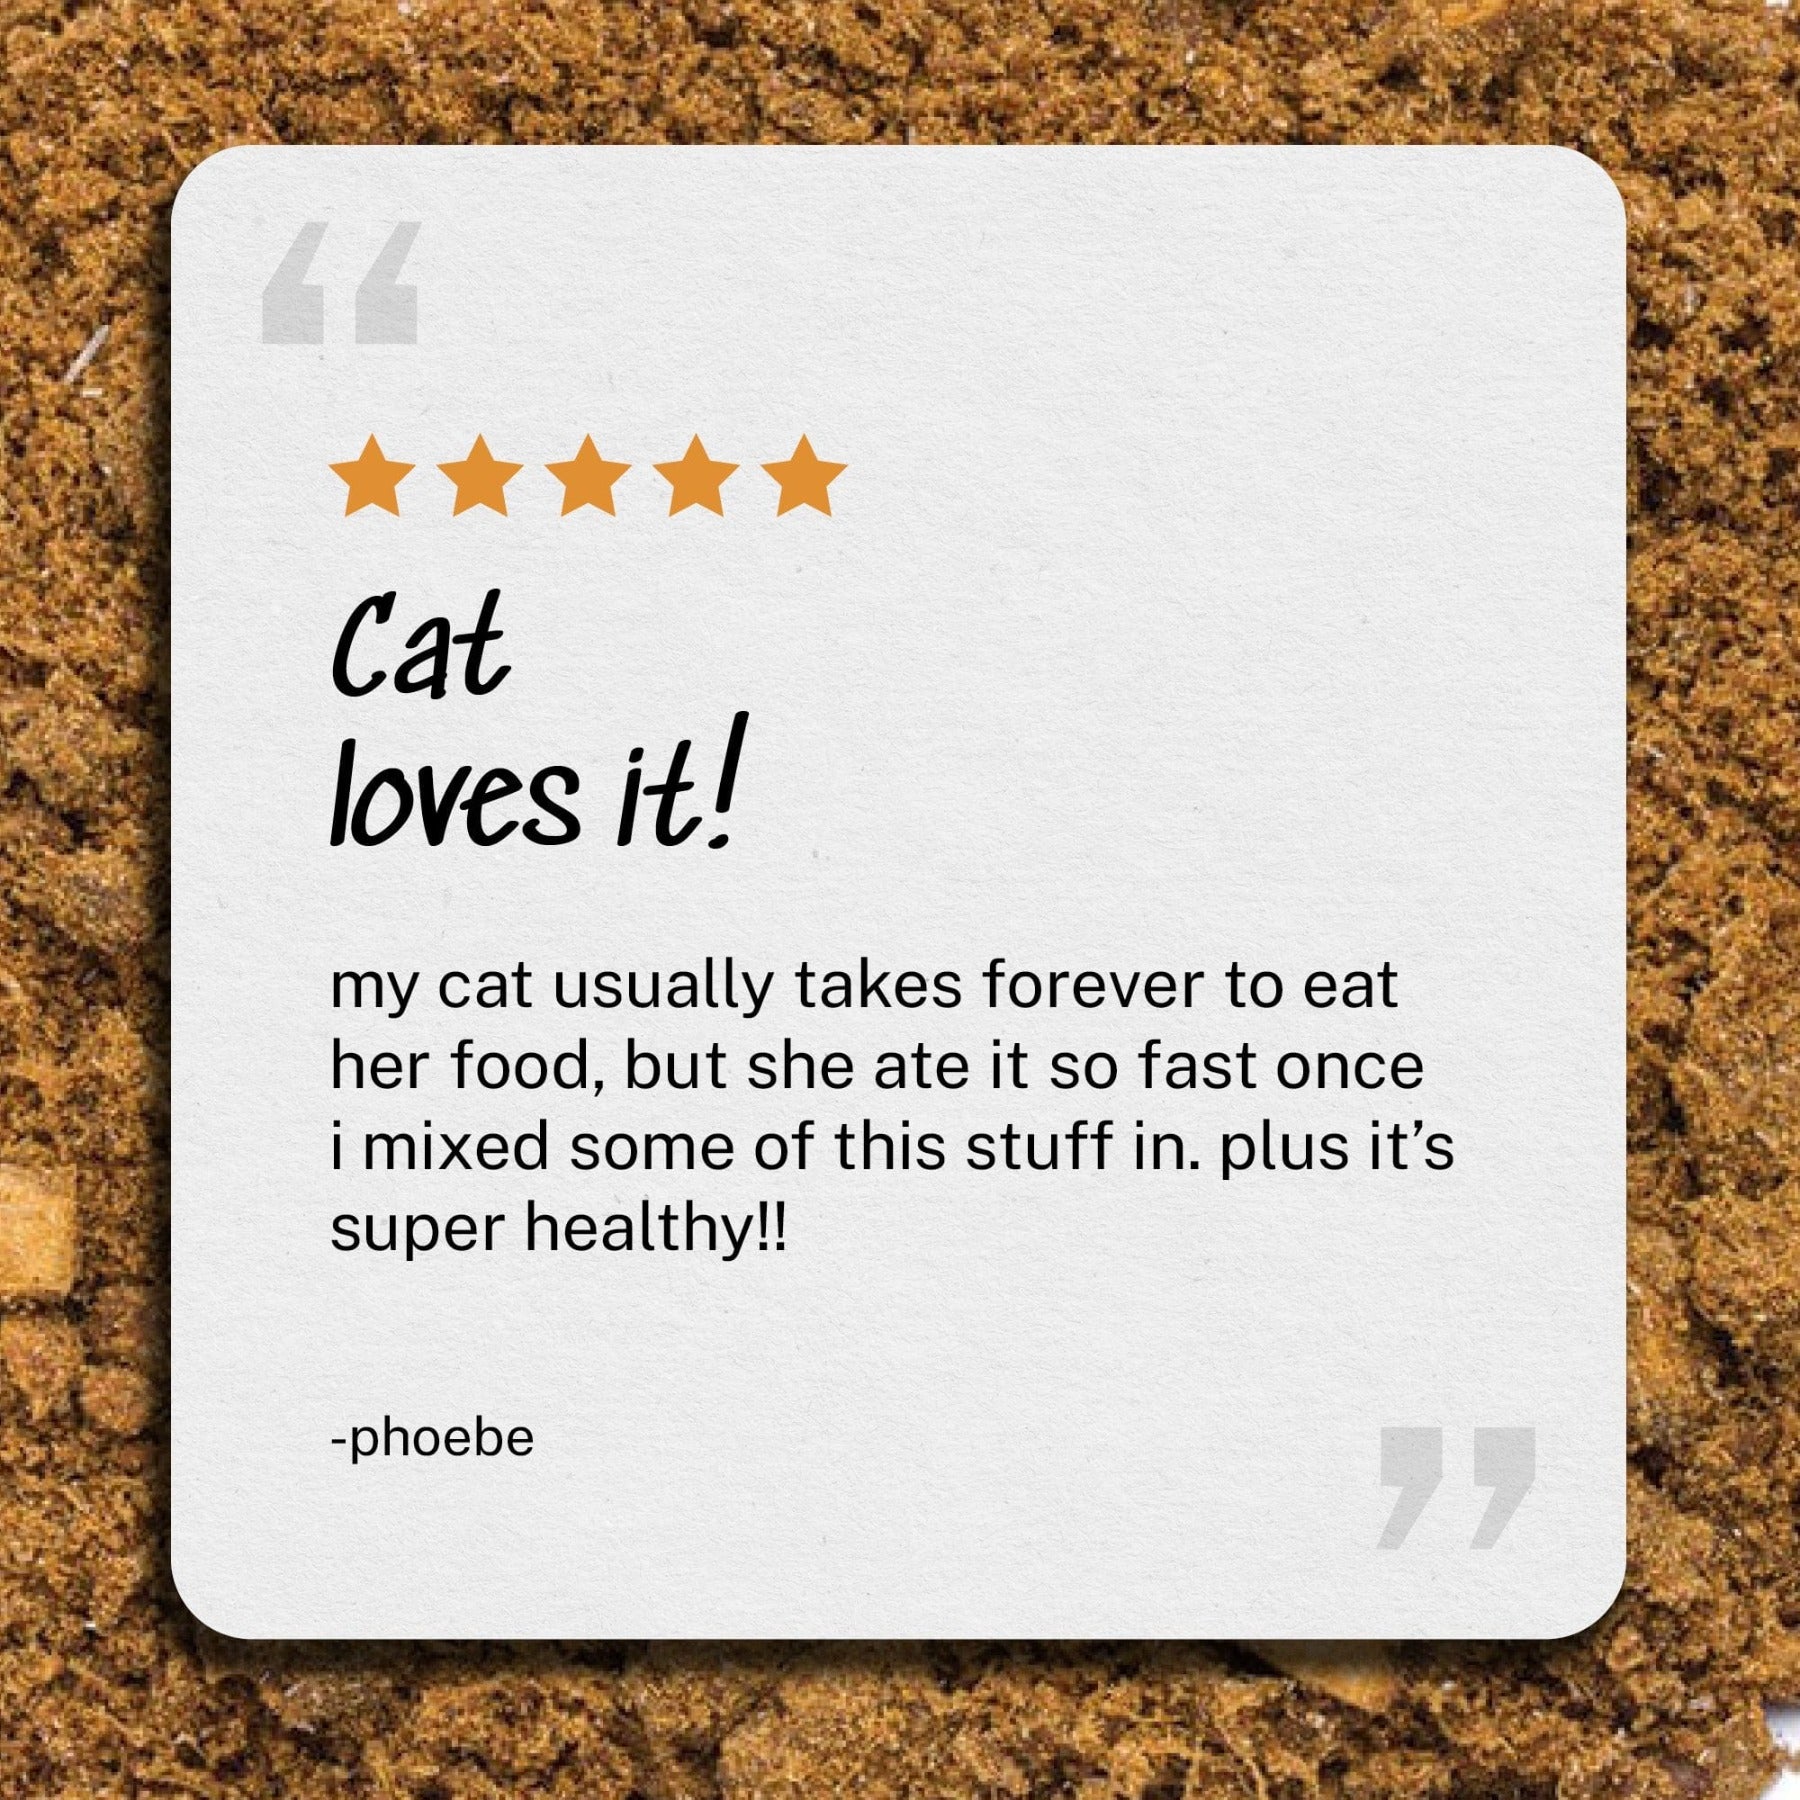 Review: Cat loves it - my cat usually takes forever to eat her food, but she ate it so fast once i mixed some of this stuff in. plus it’s super healthy! - Phoebe